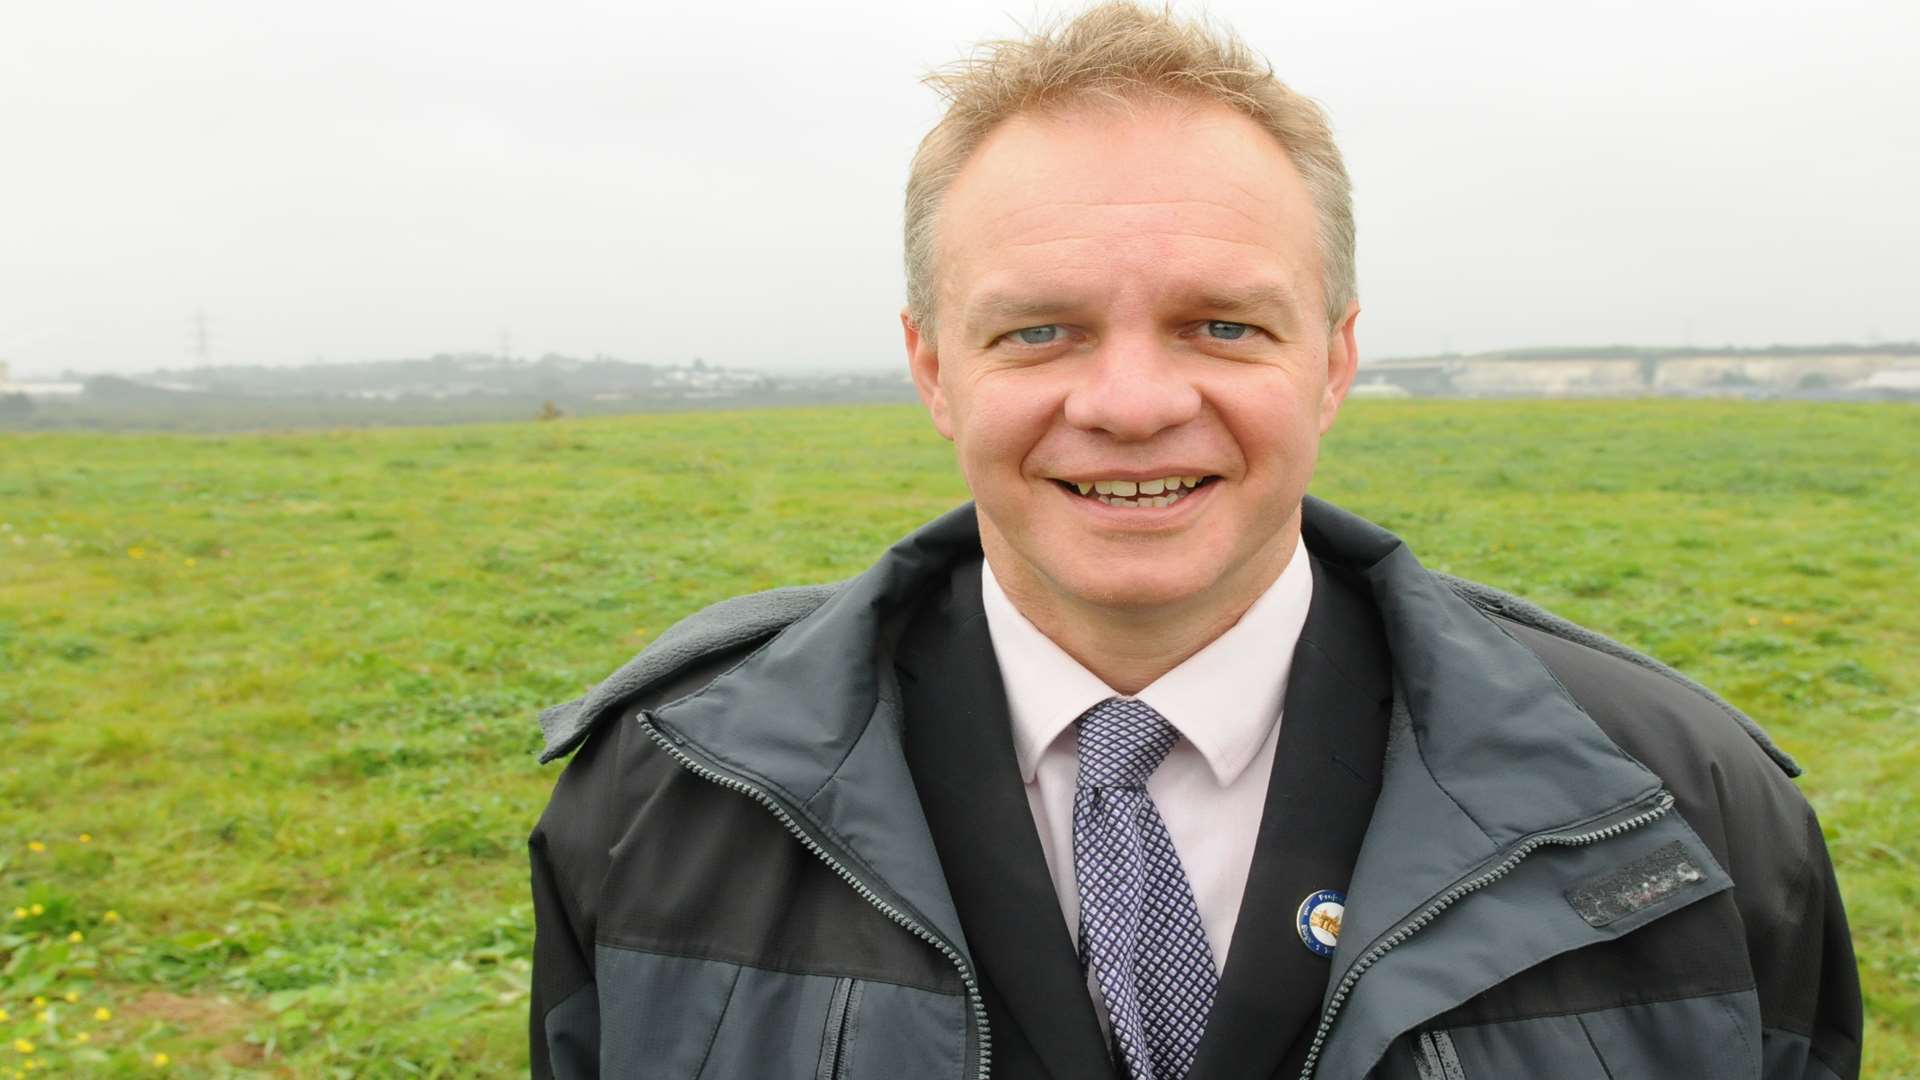 Tony Sefton on the Swanscombe Peninsula after revealing his proposals in 2012